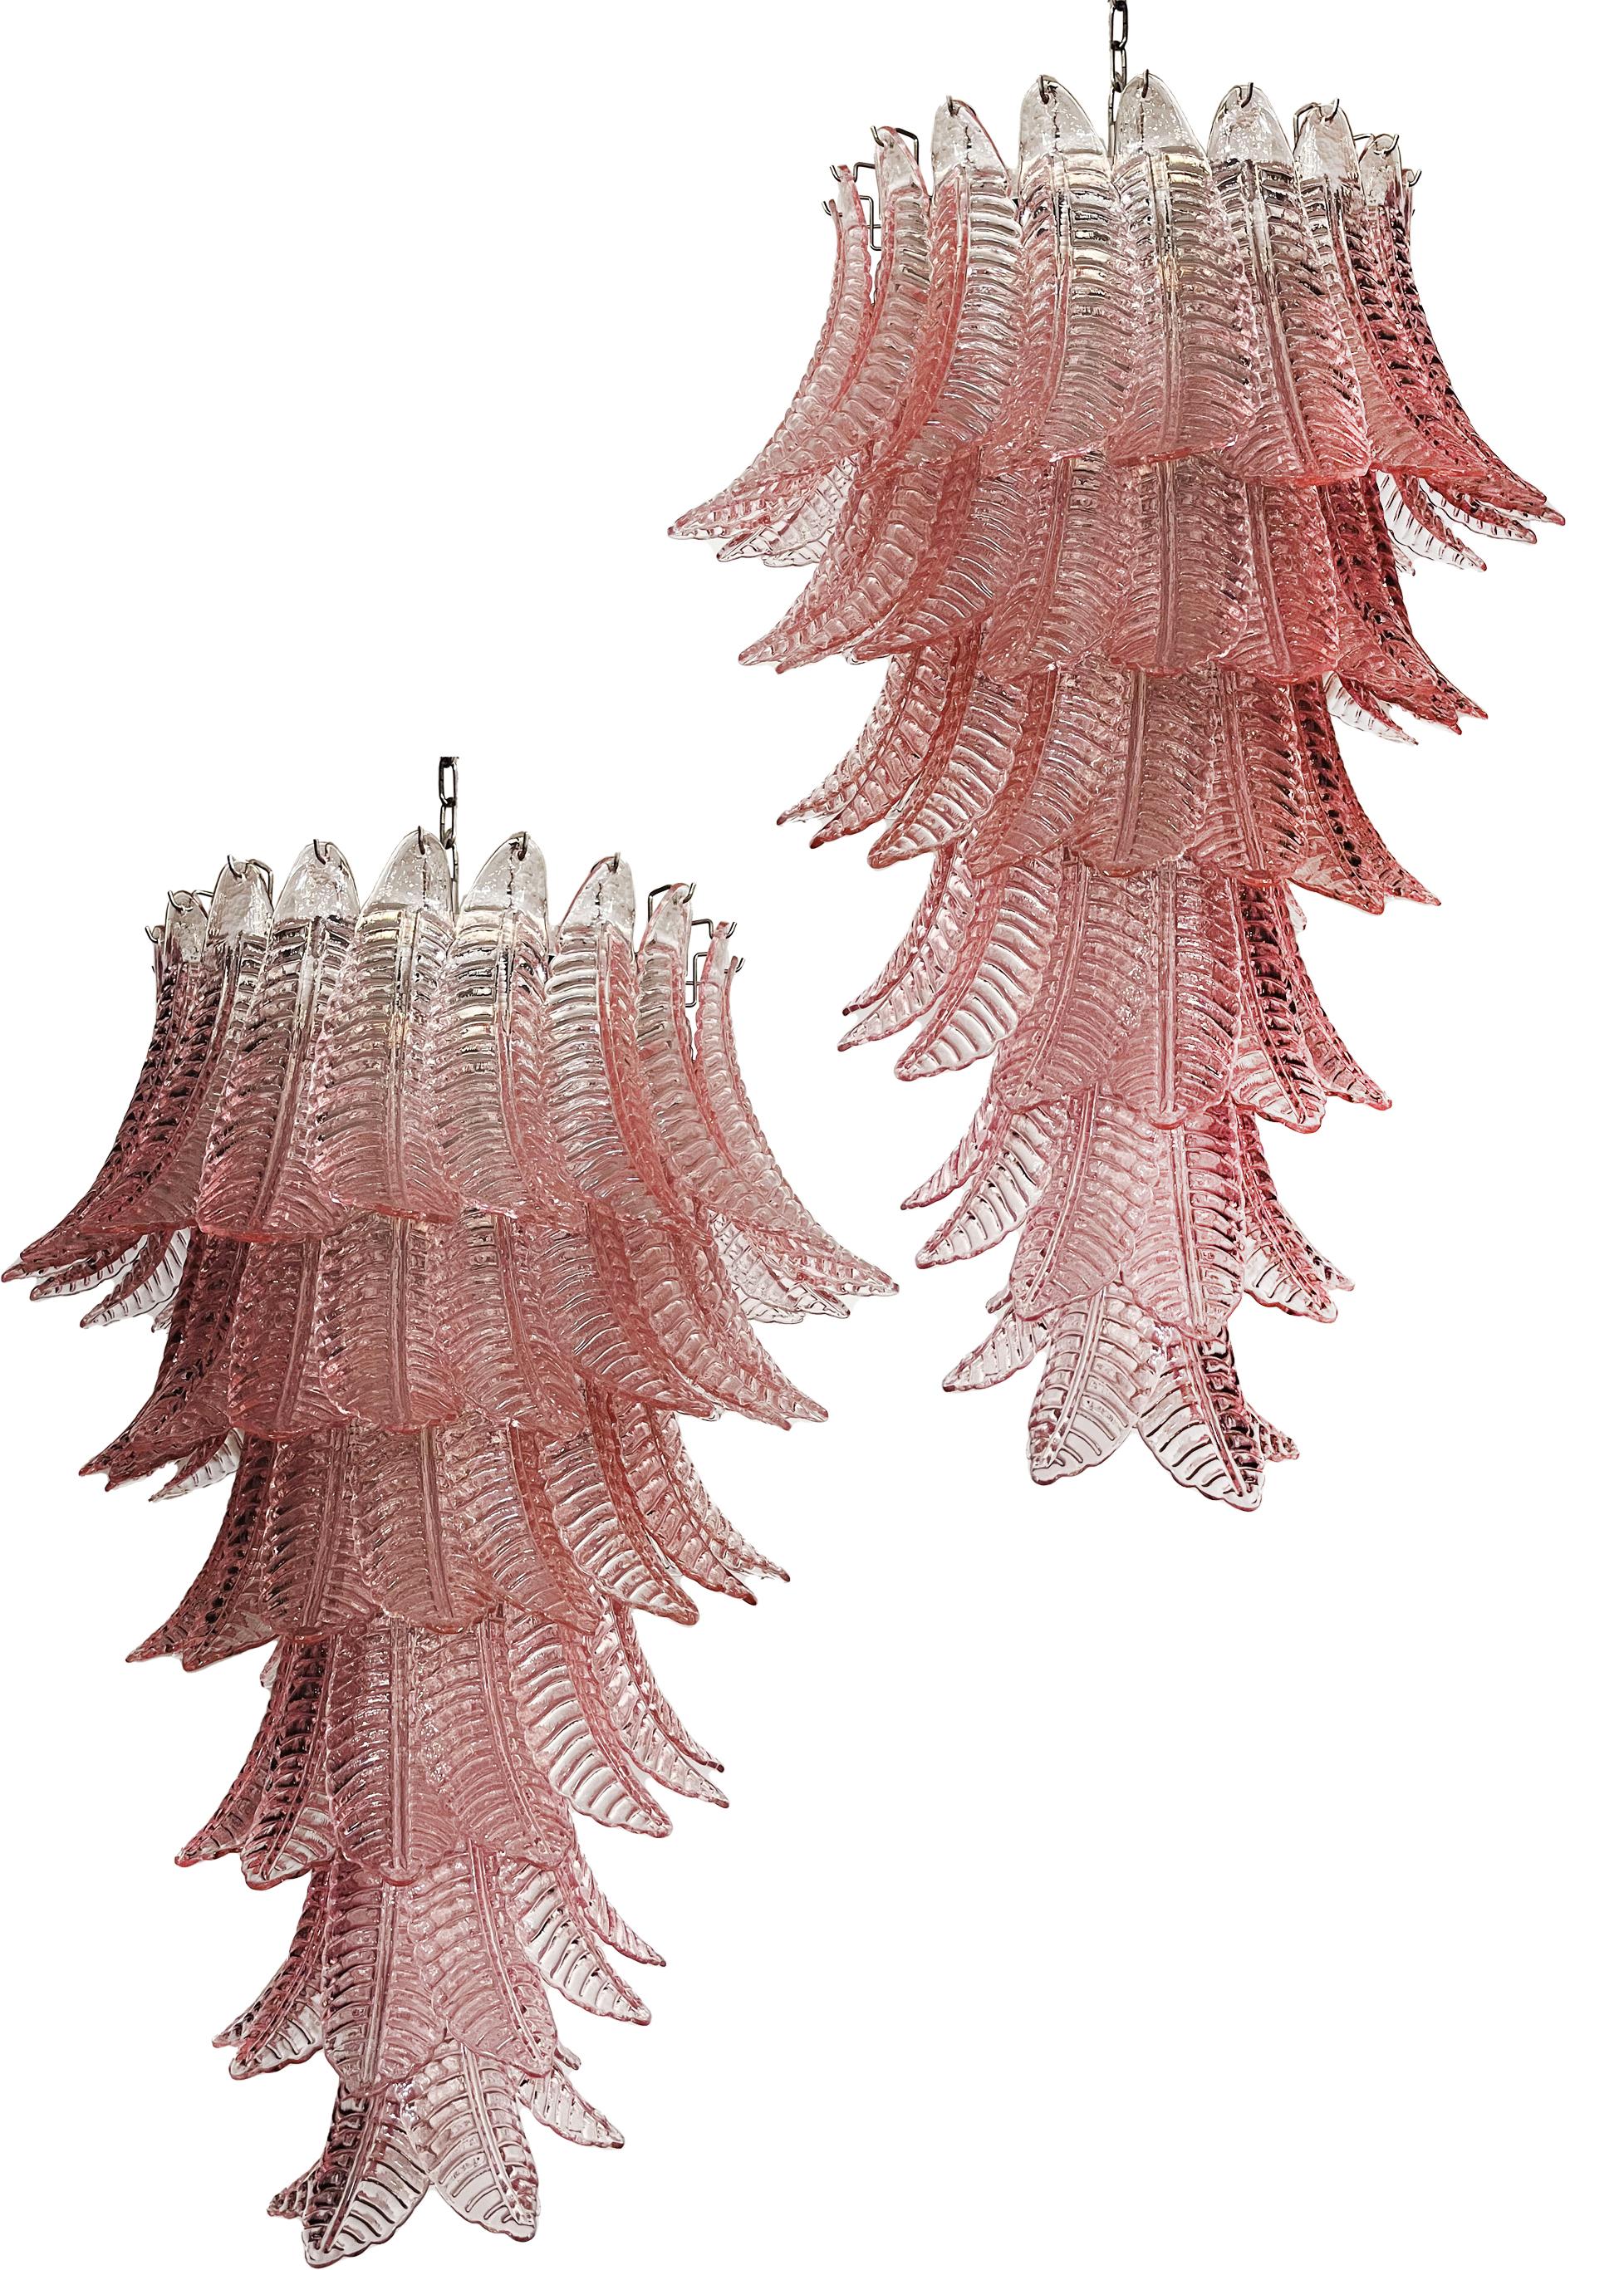 Beautiful and huge Italian Murano Chandelier composed of 83 splendid pink glasses that give a very elegant look. The glasses of this chandelier are real works of art. The glasses descend with a spiral shape.
Dimensions: 71,70 inches (185 cm) height